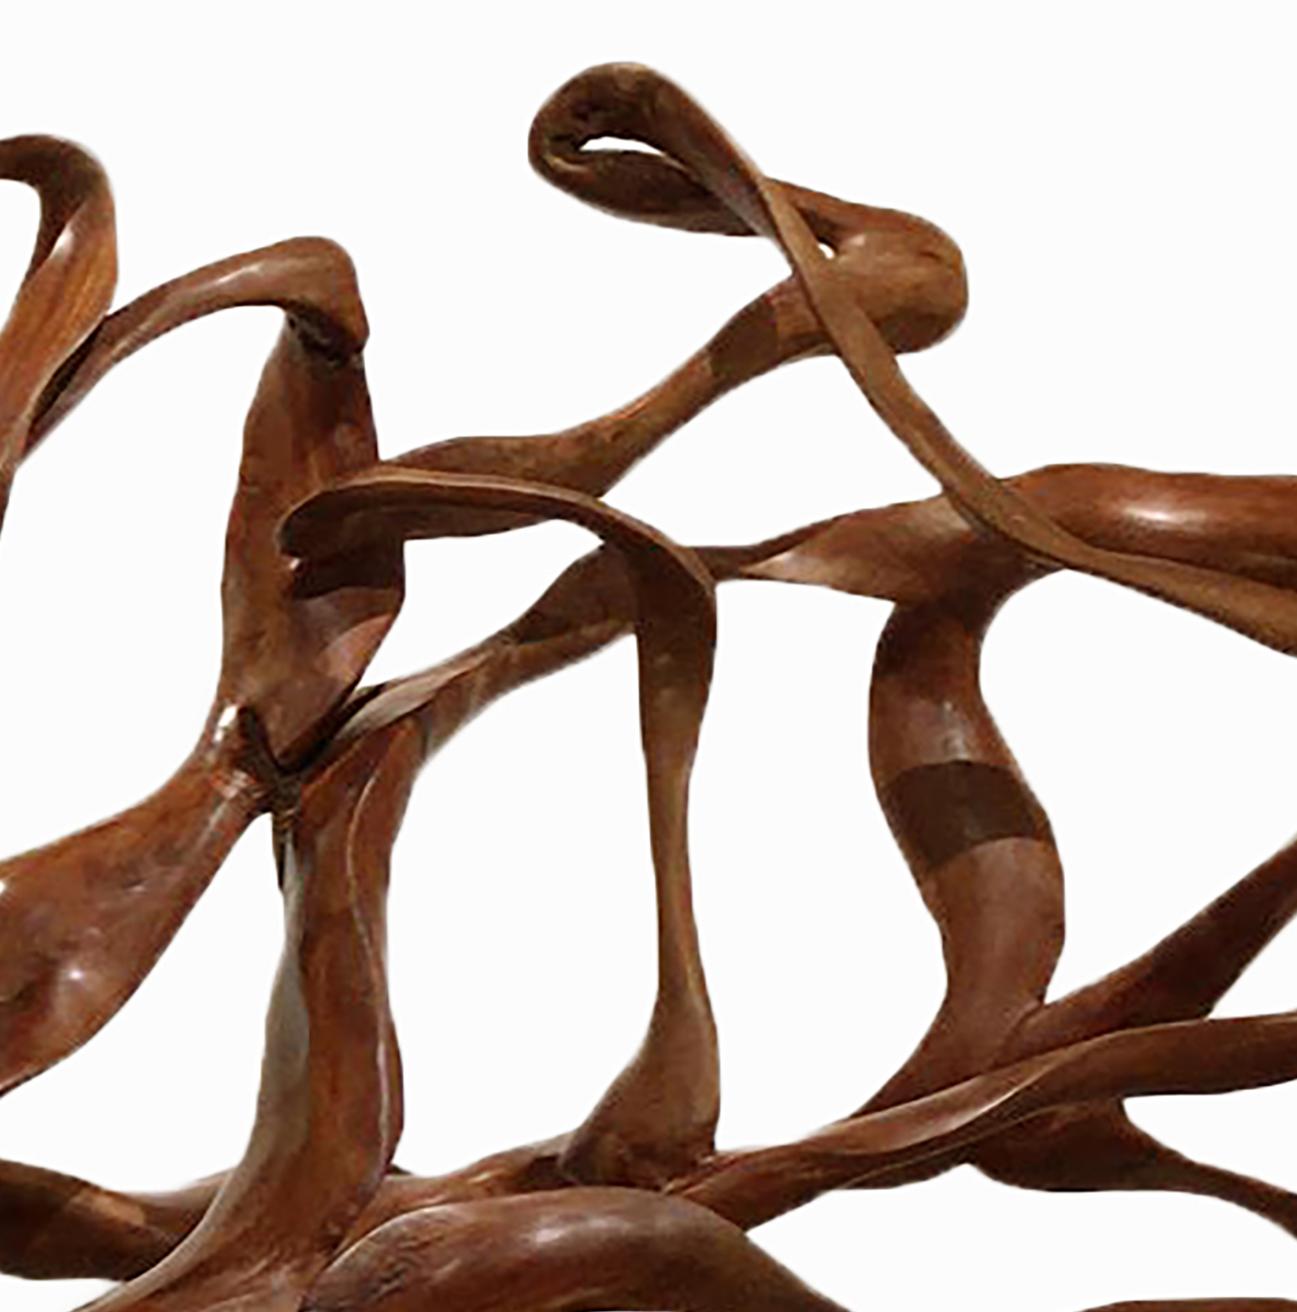 Radiance - 21st Century, Contemporary, Abstract Sculpture, Lychee Wood, Roots 1